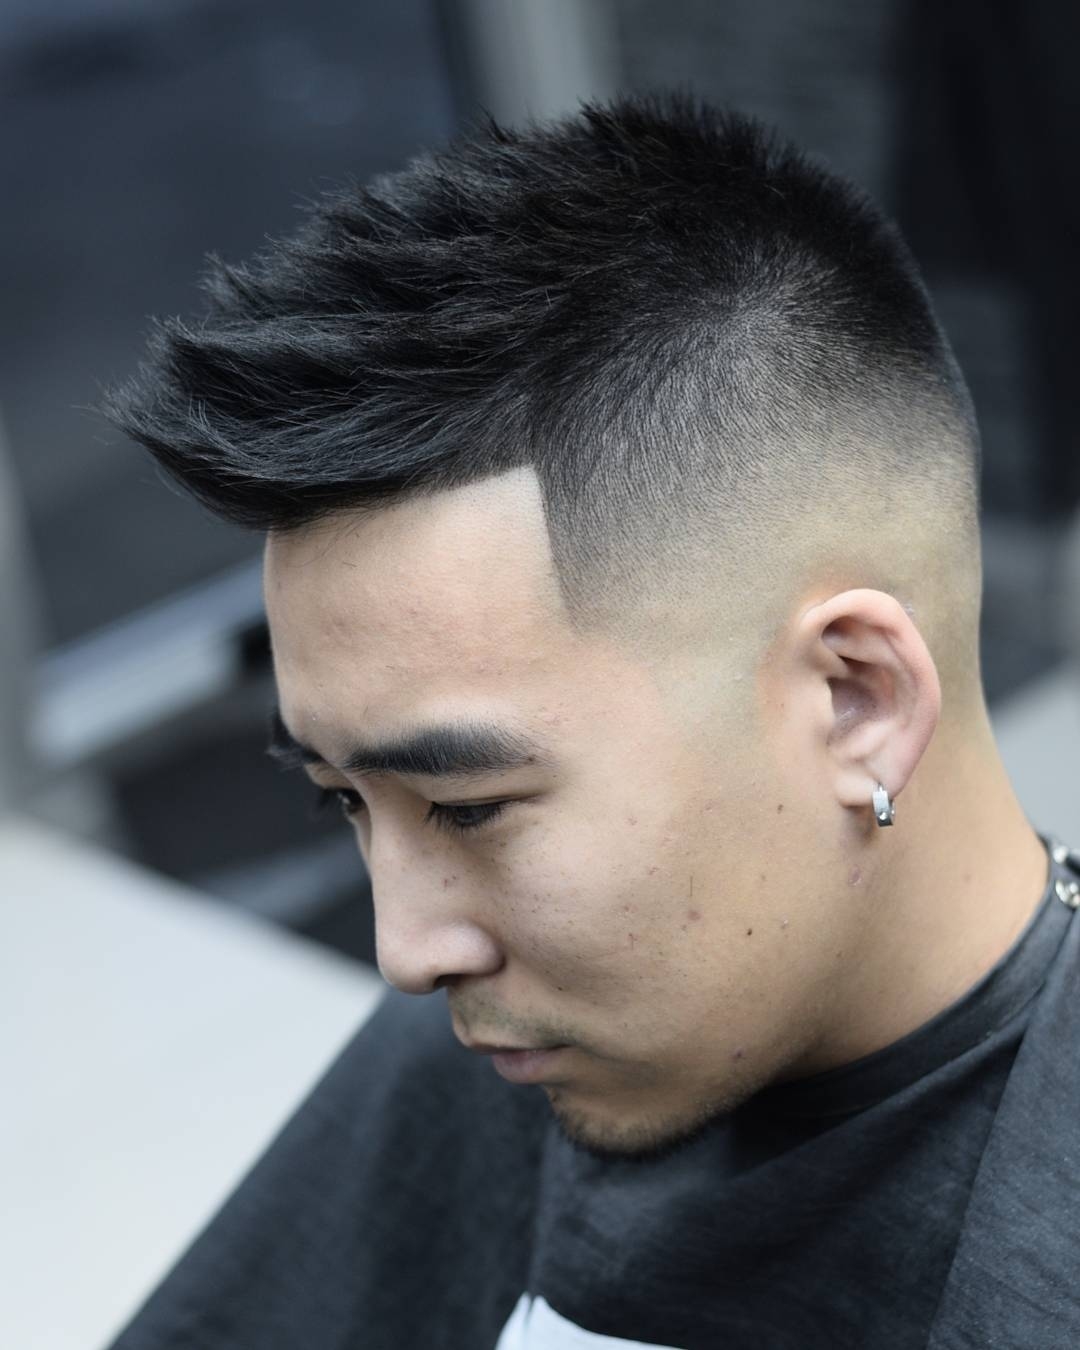 Best Hairstyles For Asian Men pertaining to Asian Hairstyles Men 2019